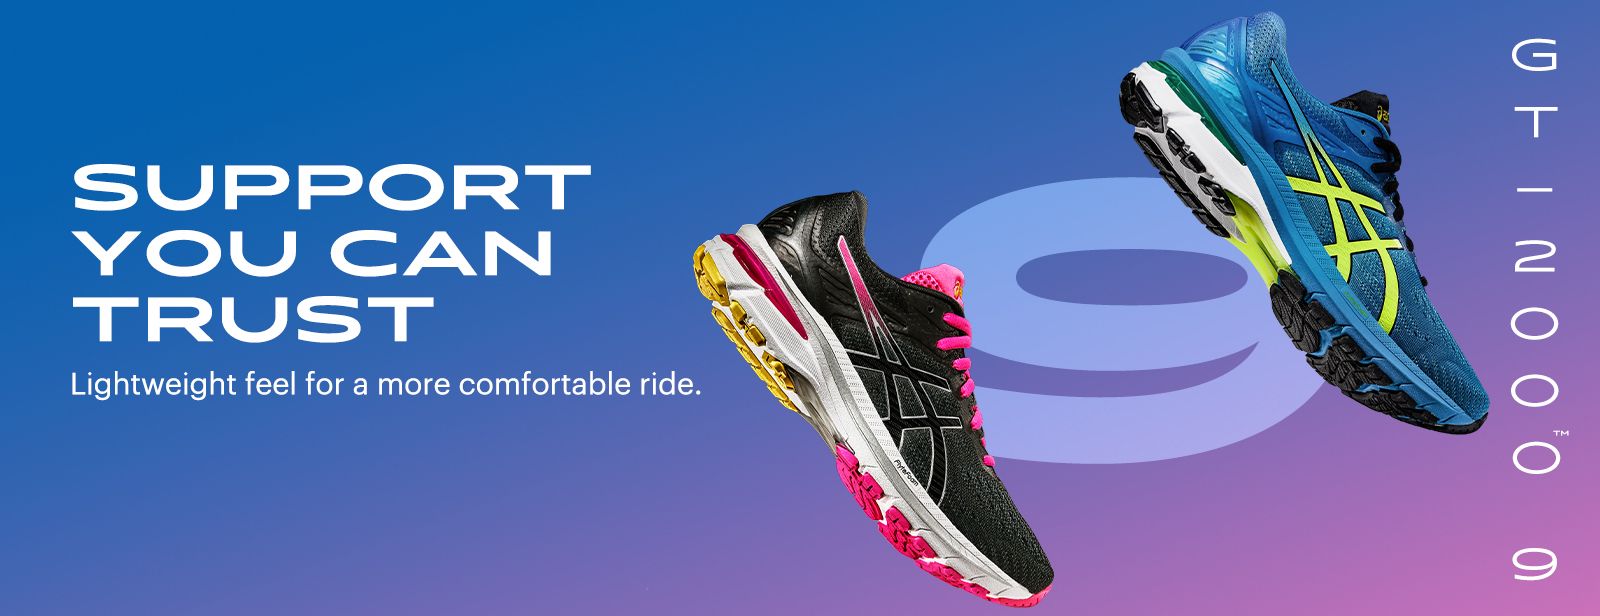 asics running shoes philippines price